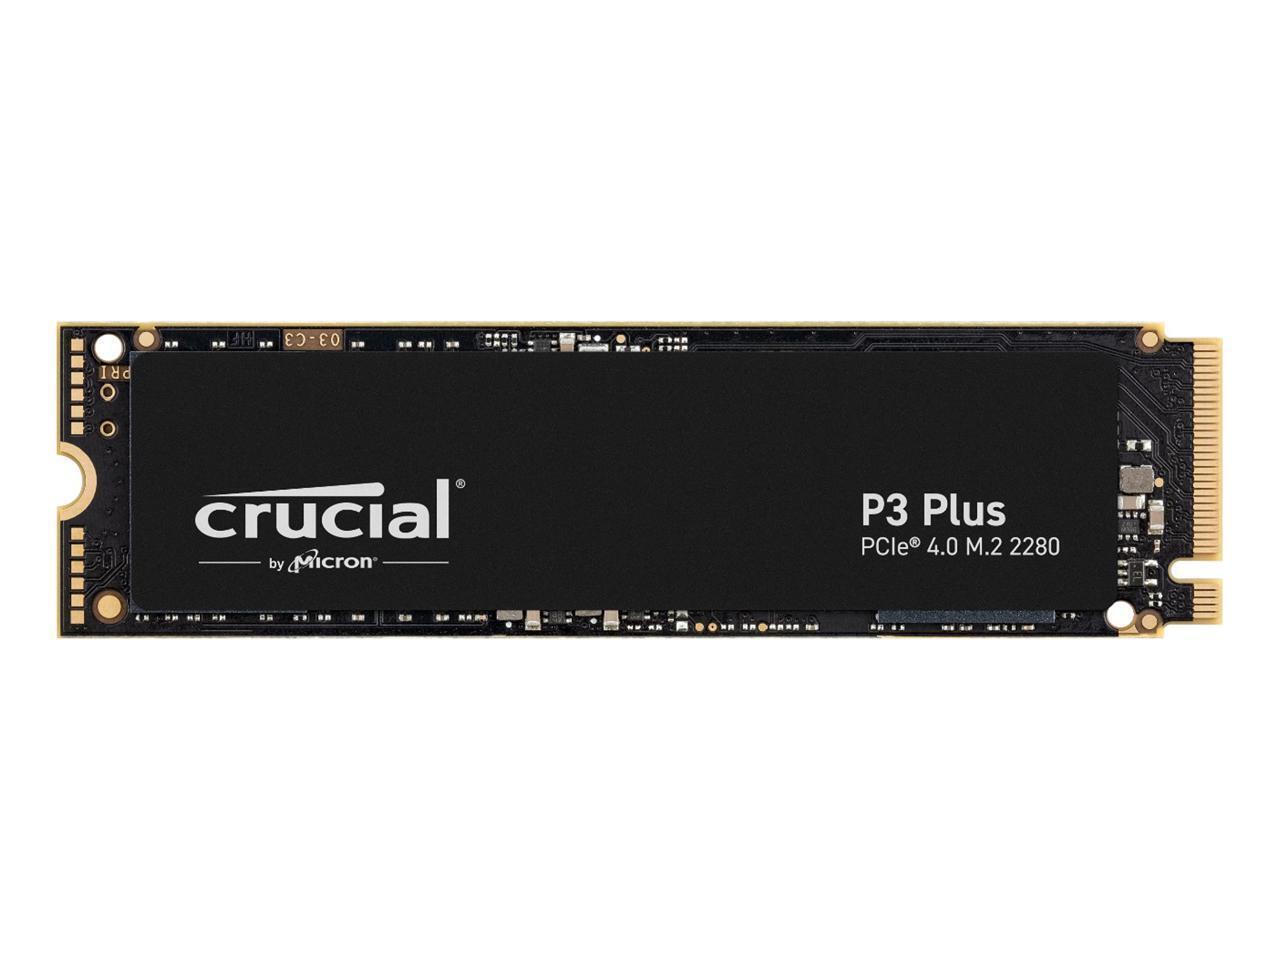 Crucial P3 Plus 1TB PCIe 4.0 3D NAND NVMe M.2 SSD, up to 5000MB/s - CT1000P3PSSD